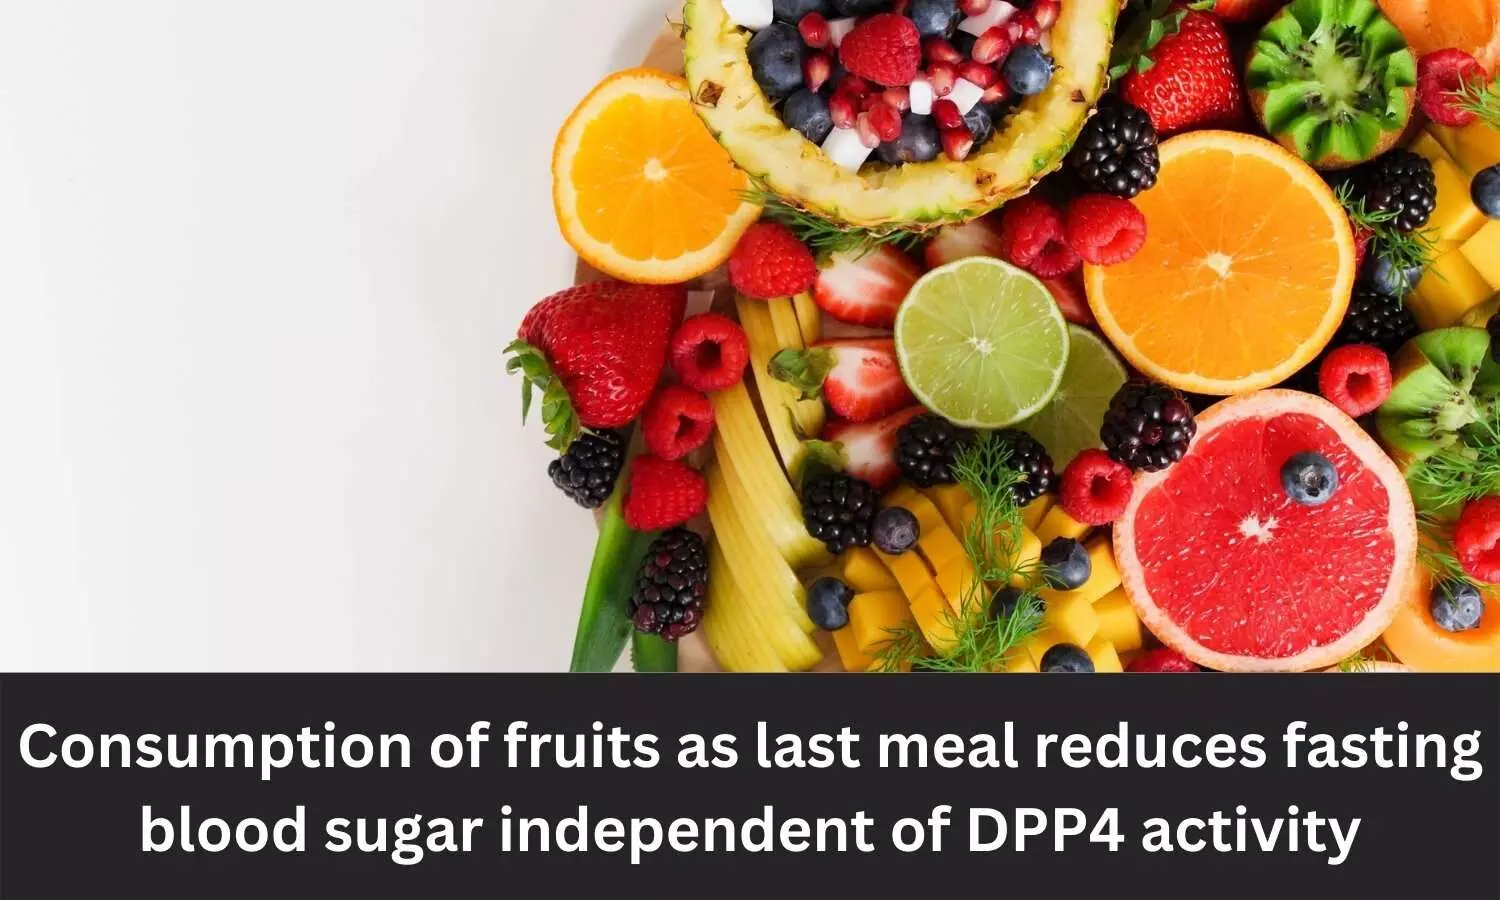 Consumption of fruits as last meal reduces fasting blood sugar independent of DPP4 activity